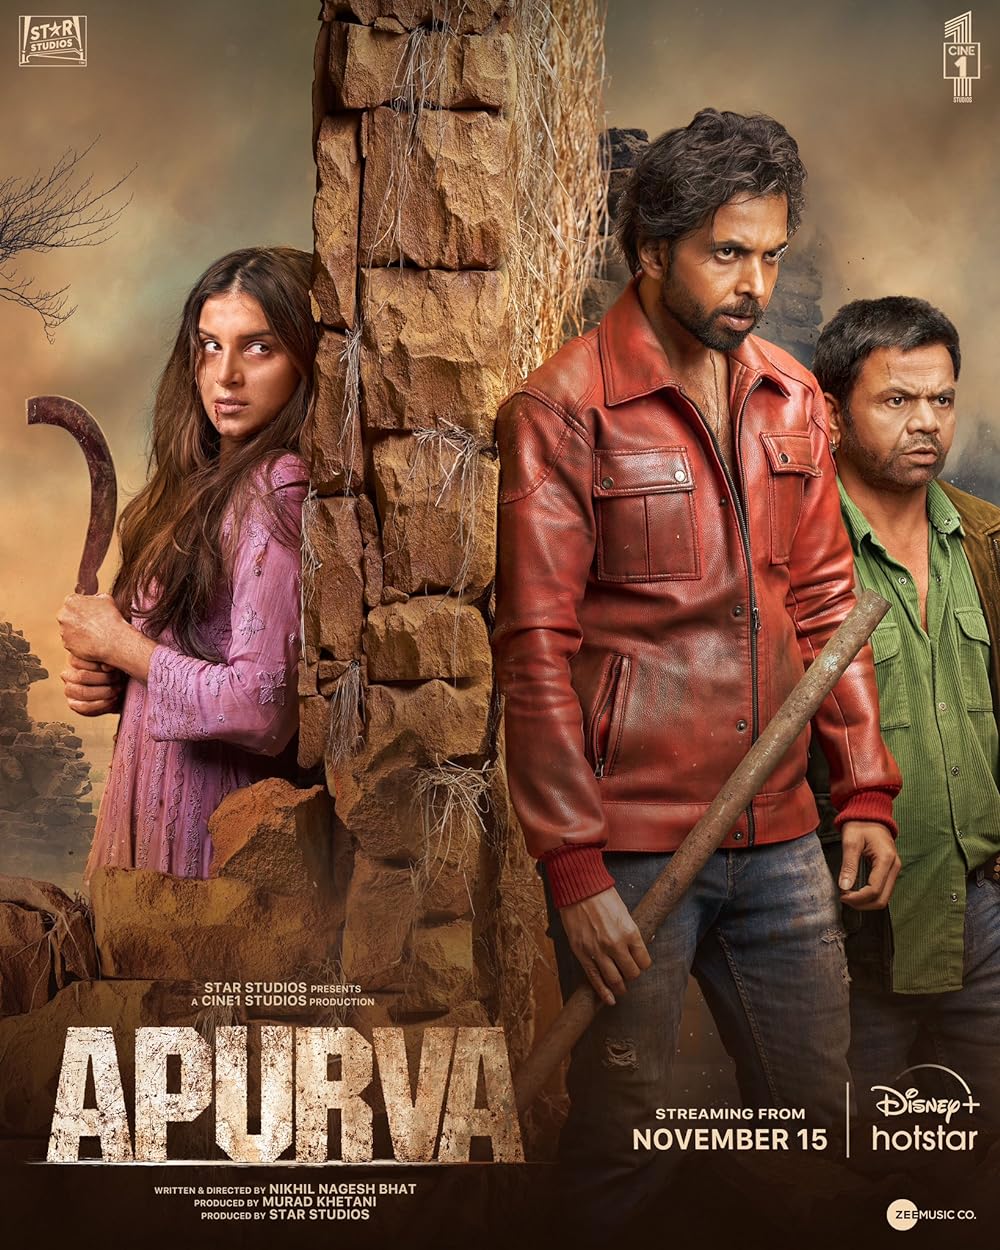 Read More About The Article Apurva (2023) | Bollywood Movie